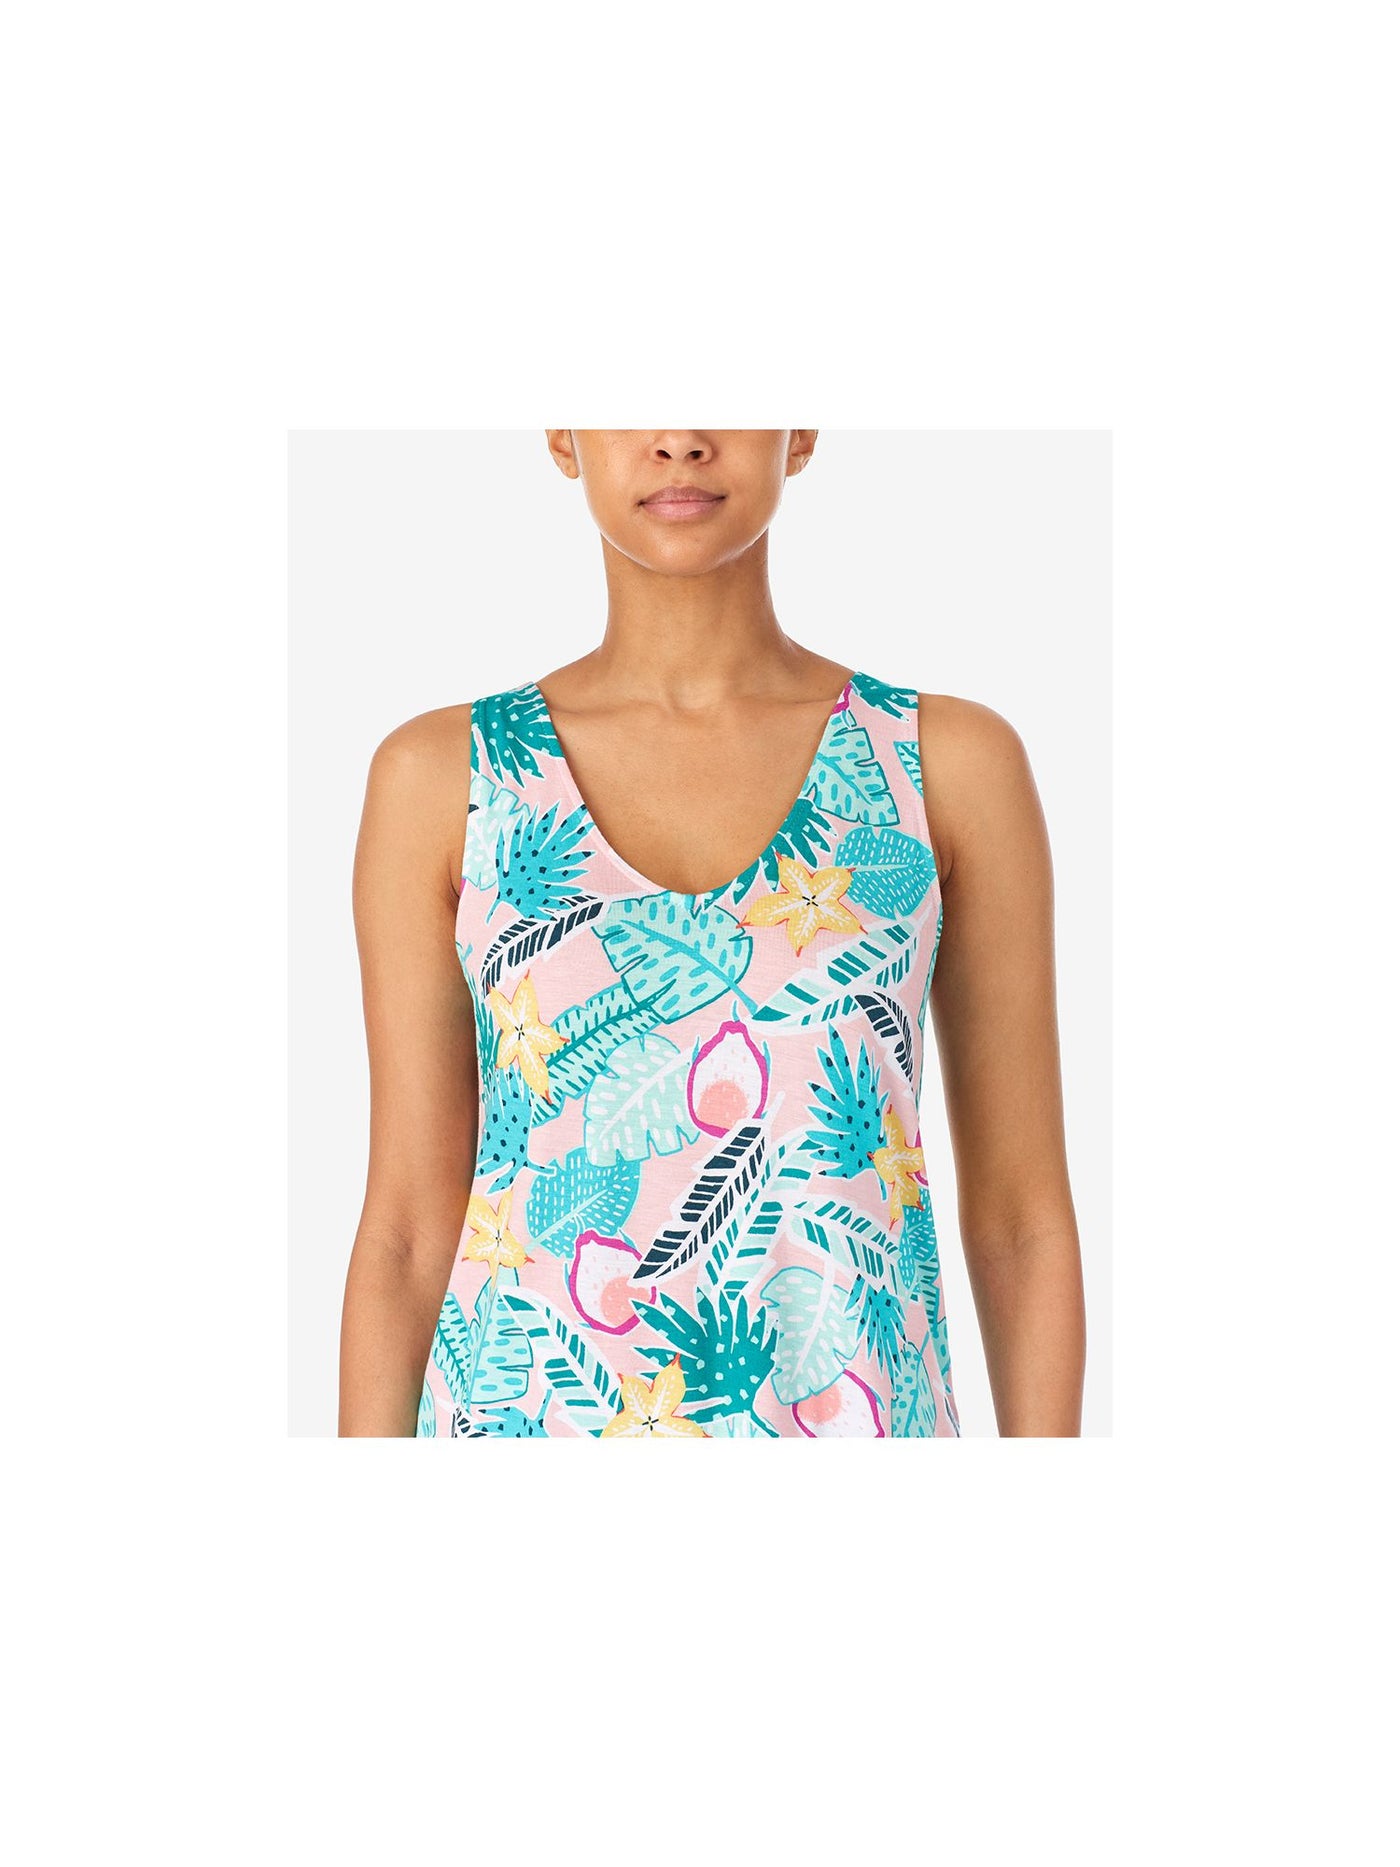 CUDDL DUDS Sets Turquoise Elastic Band Printed Sleeveless V Neck Everyday Tank Juniors S